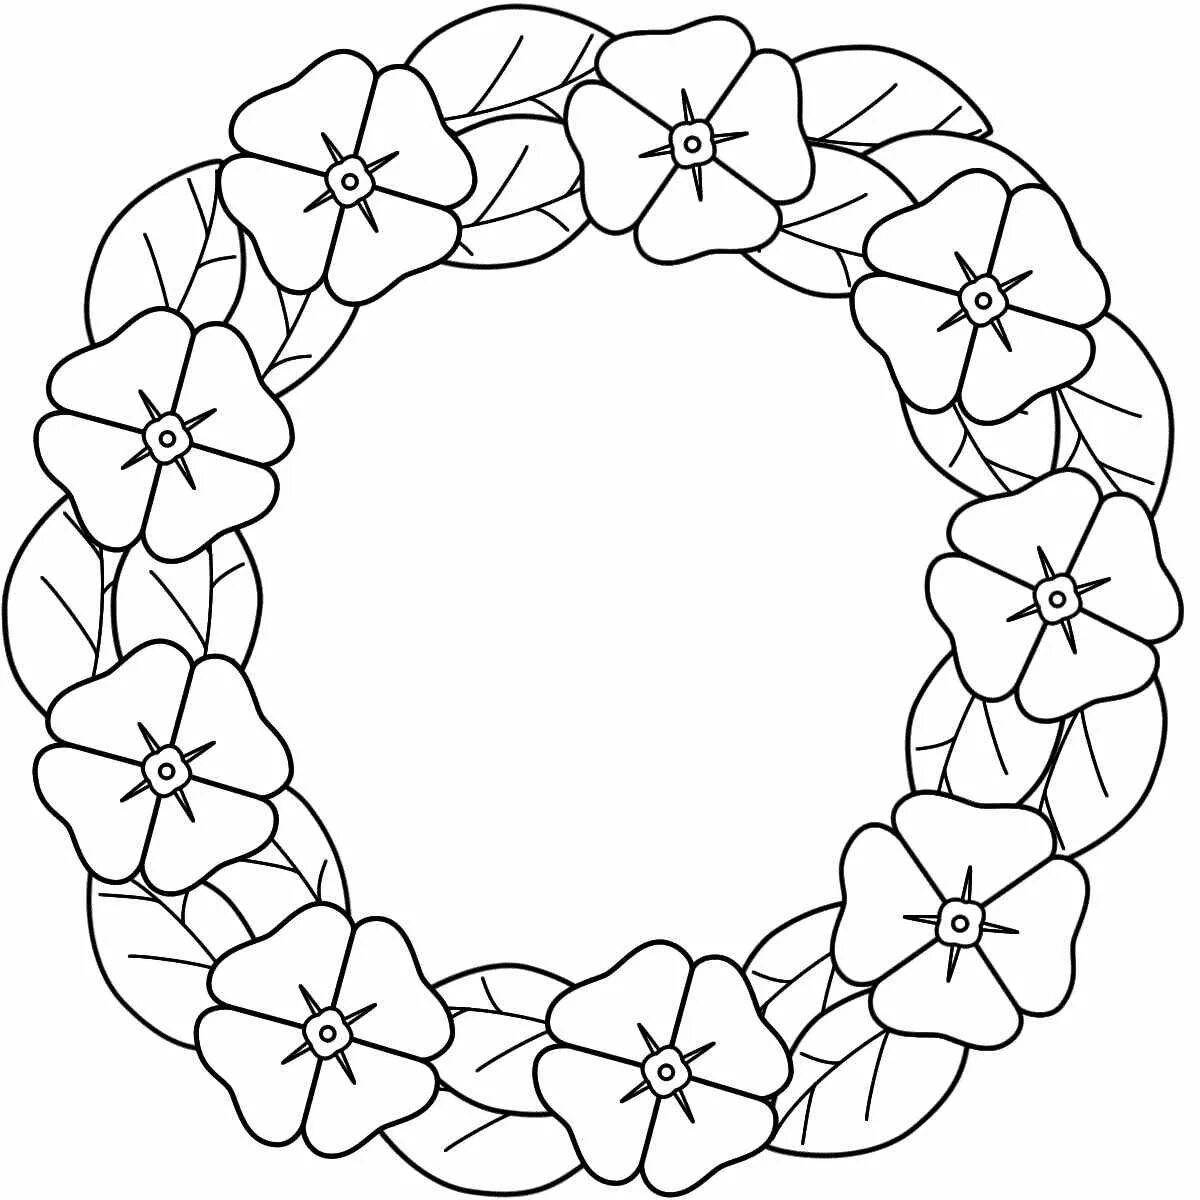 Coloring page gorgeous wreath of flowers